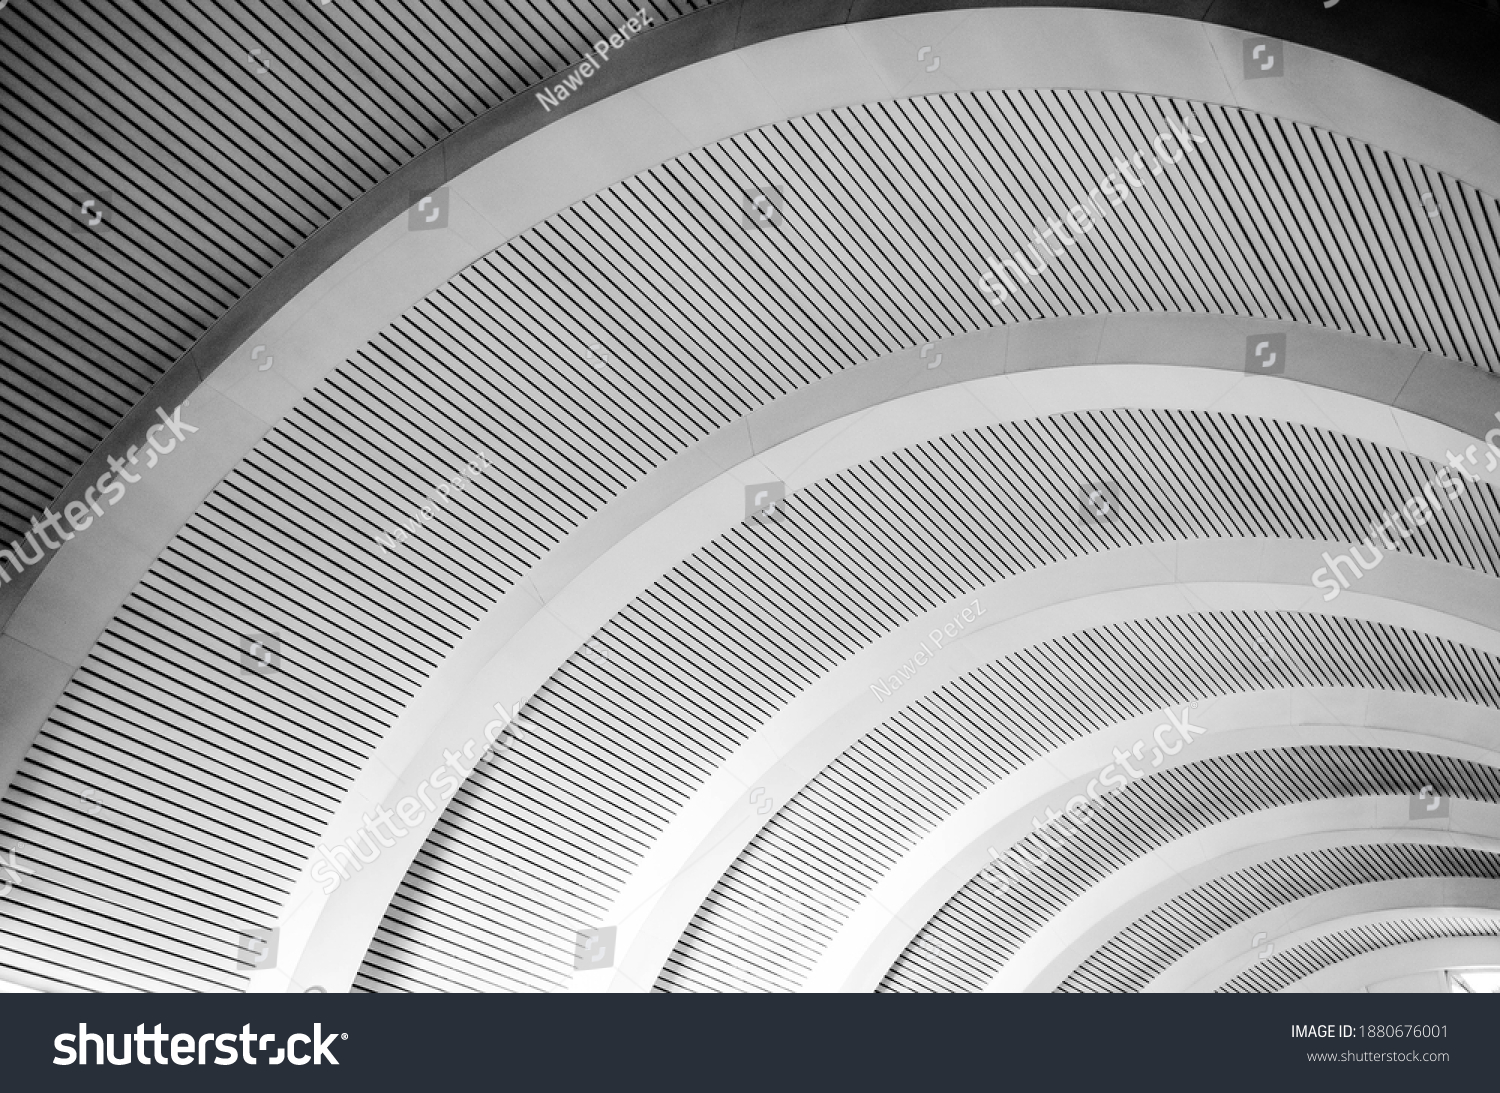 Curved roof arqued in black and white #1880676001